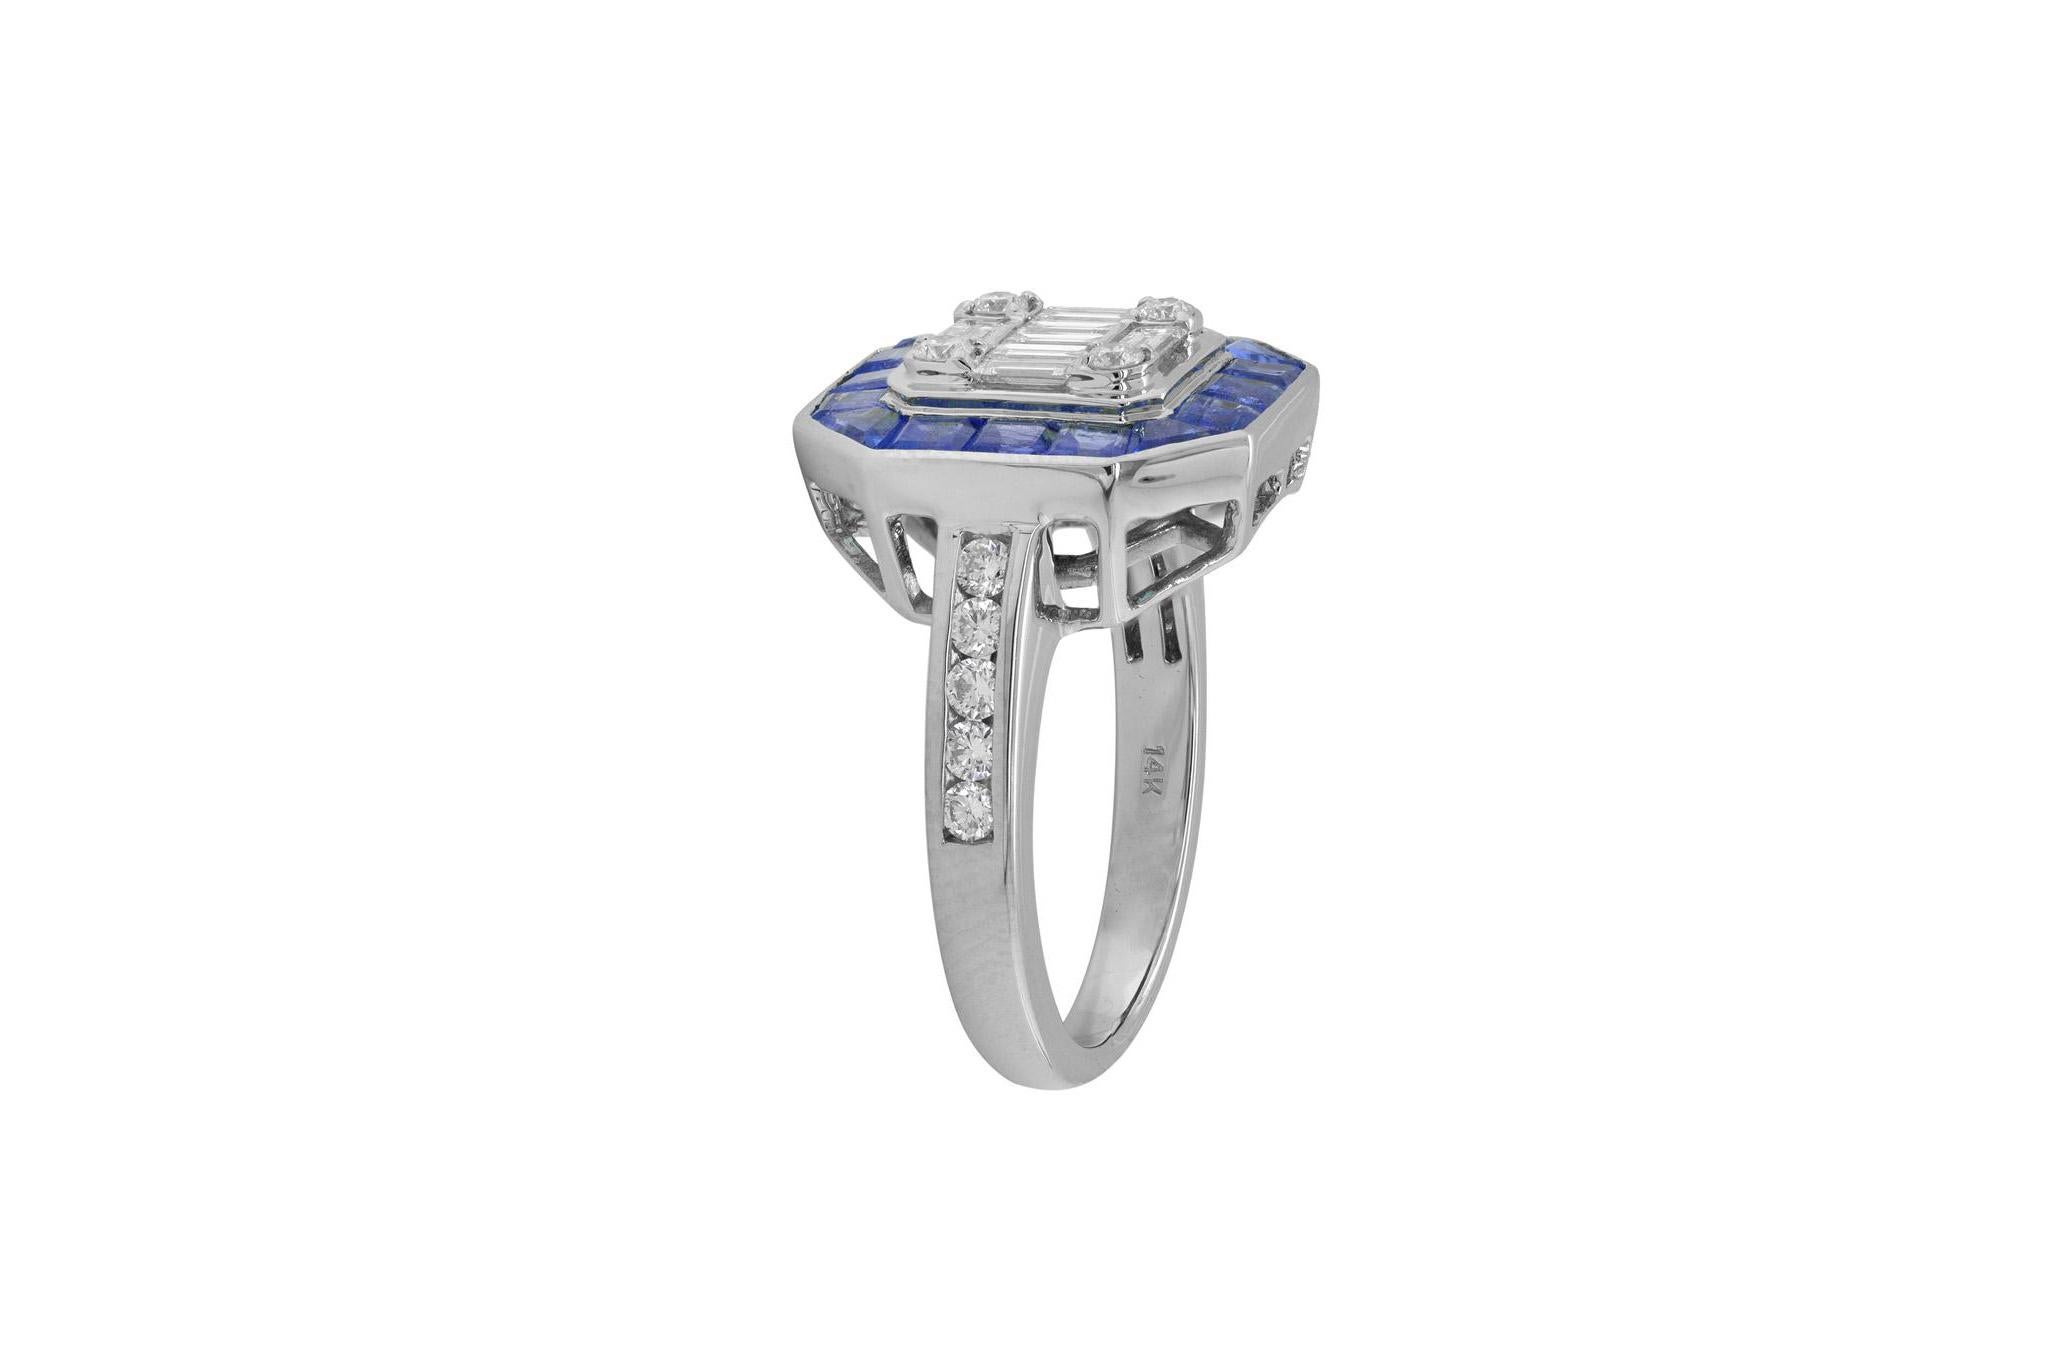 Solid 14K White Gold 

Natural Blue Sapphire Princess Cut 2.30 Total Carat Weight 

Natural White Round and Baguette Diamonds G-H SI Clarity .89 Total Diamond Weight

Size 6.5 ( Sizable)

This Piece features beautiful Precious Stone quality and